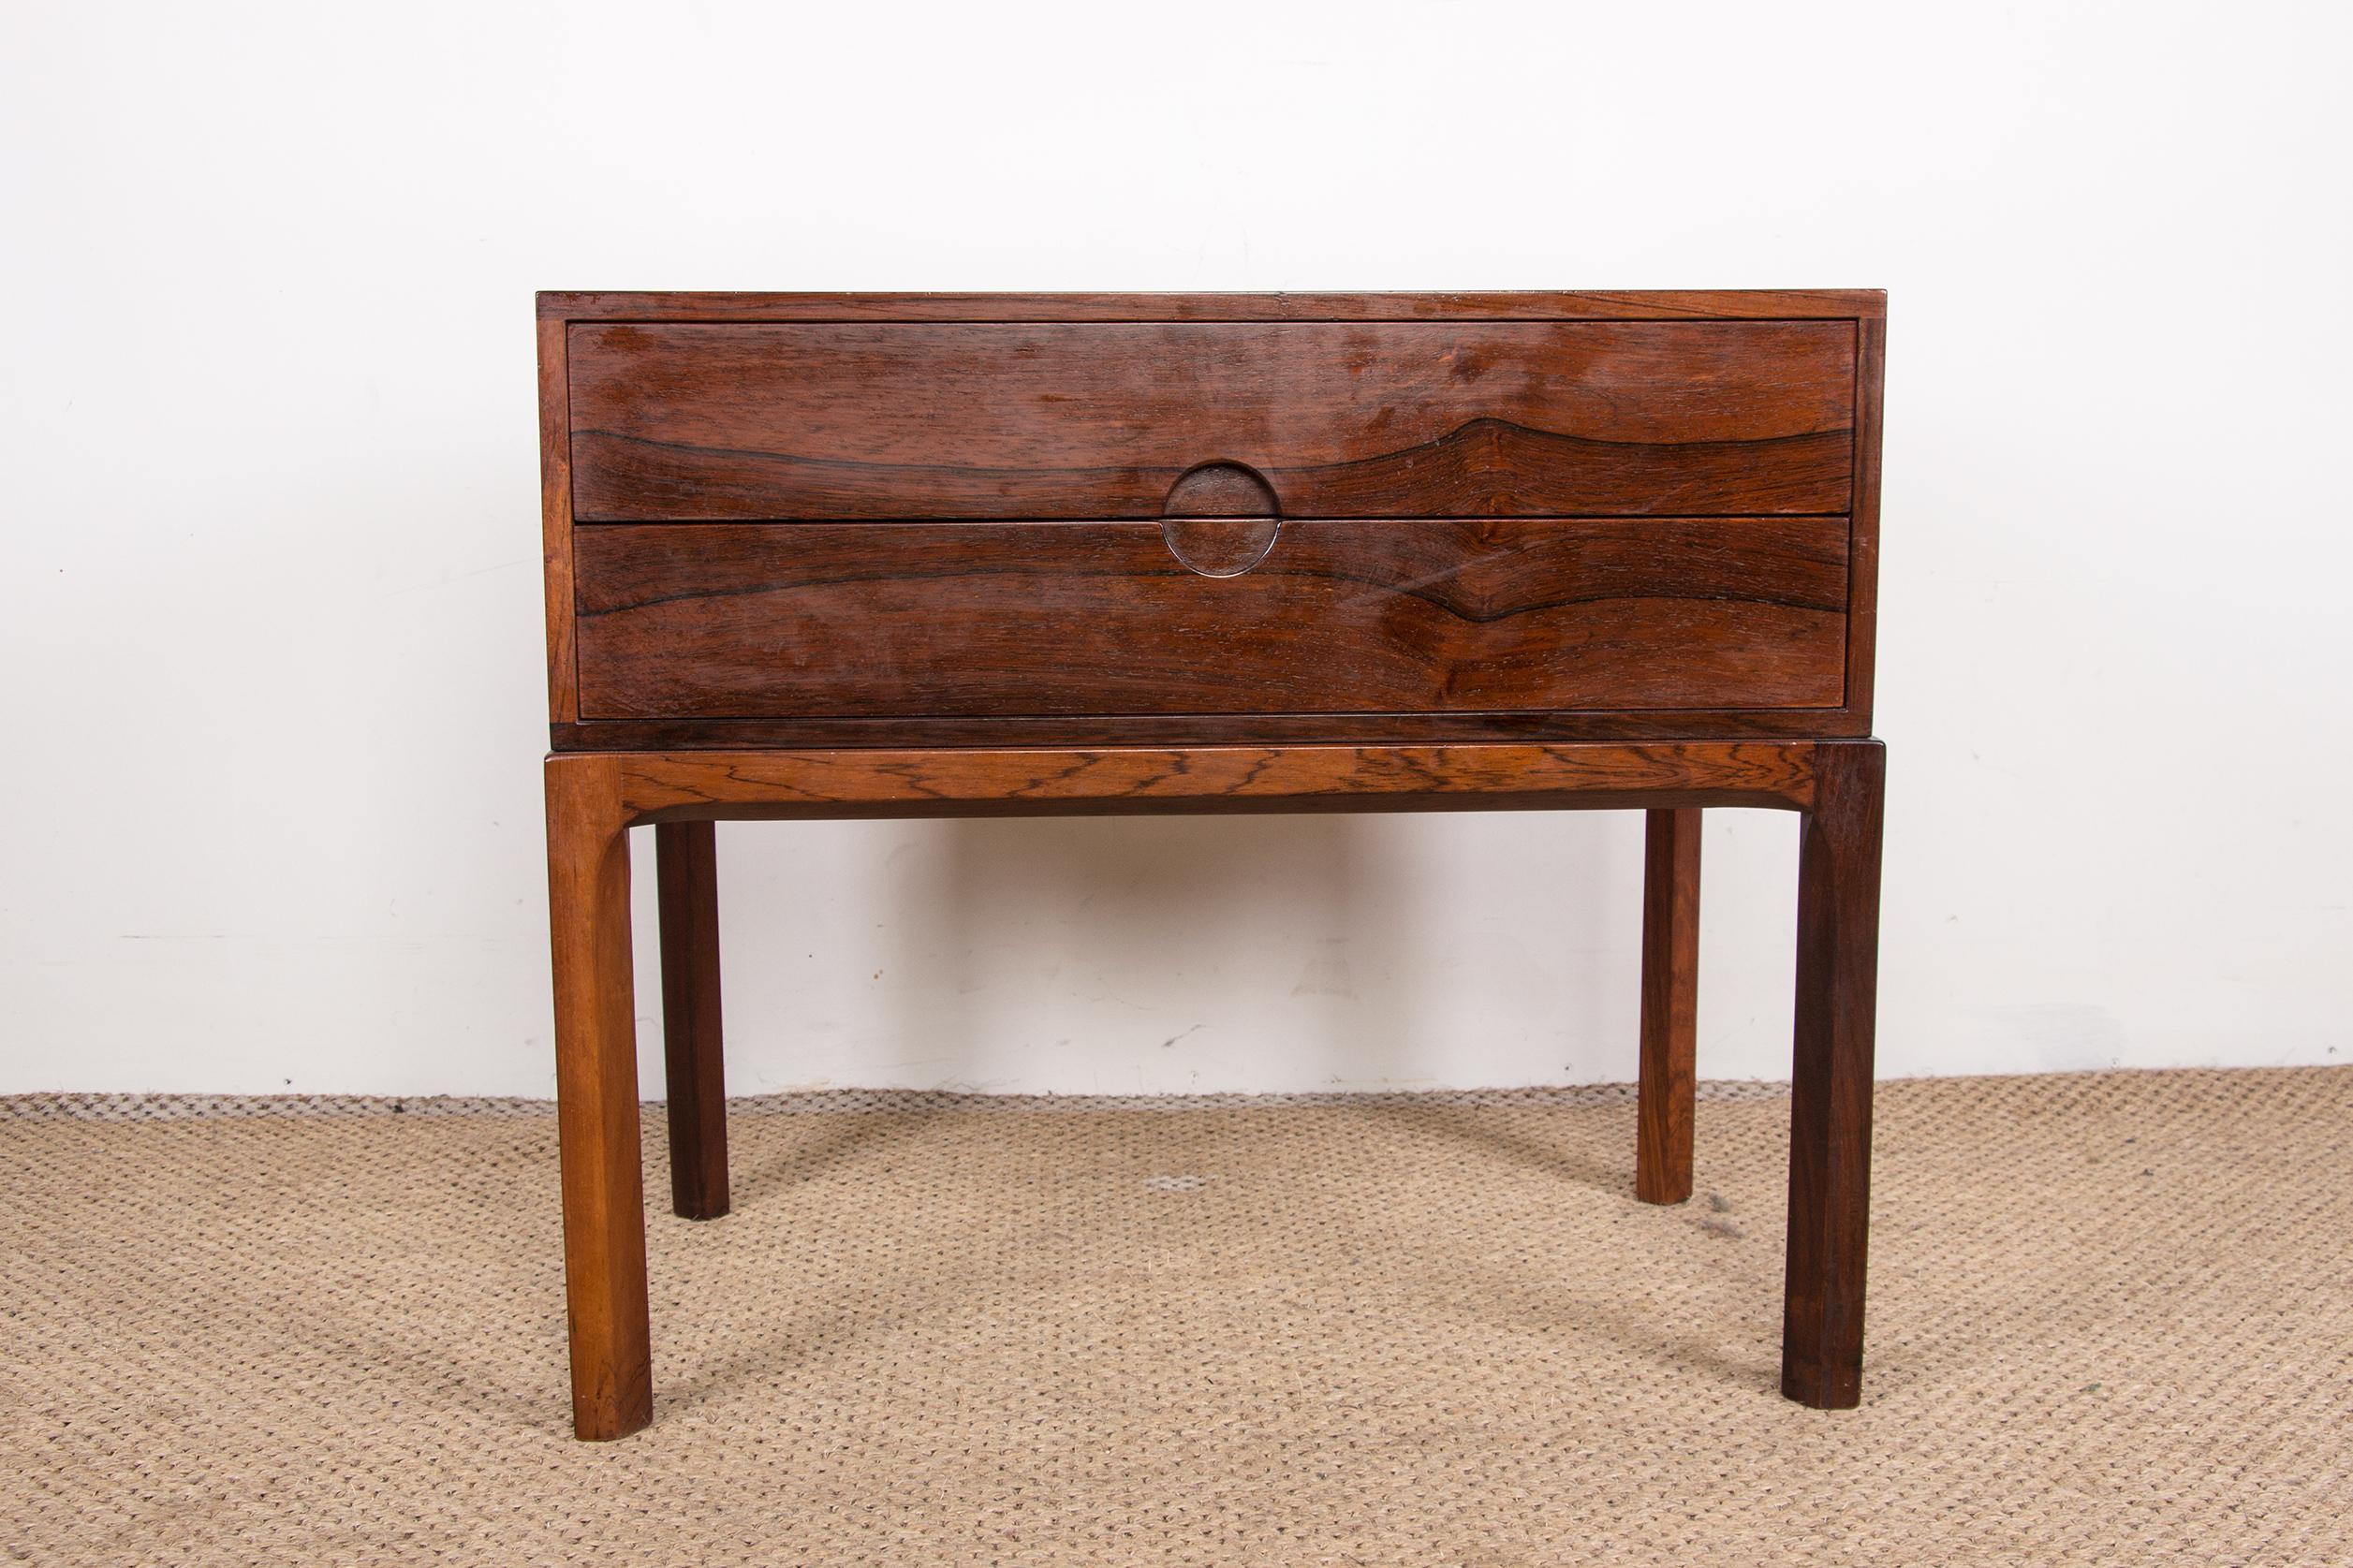 Magnificent little Scandinavian piece of furniture with multiple possible uses, bedside table or bedside table, chest of drawers, console table. Very well made piece of furniture with a very elegant sleek design, very good manufacturing quality.